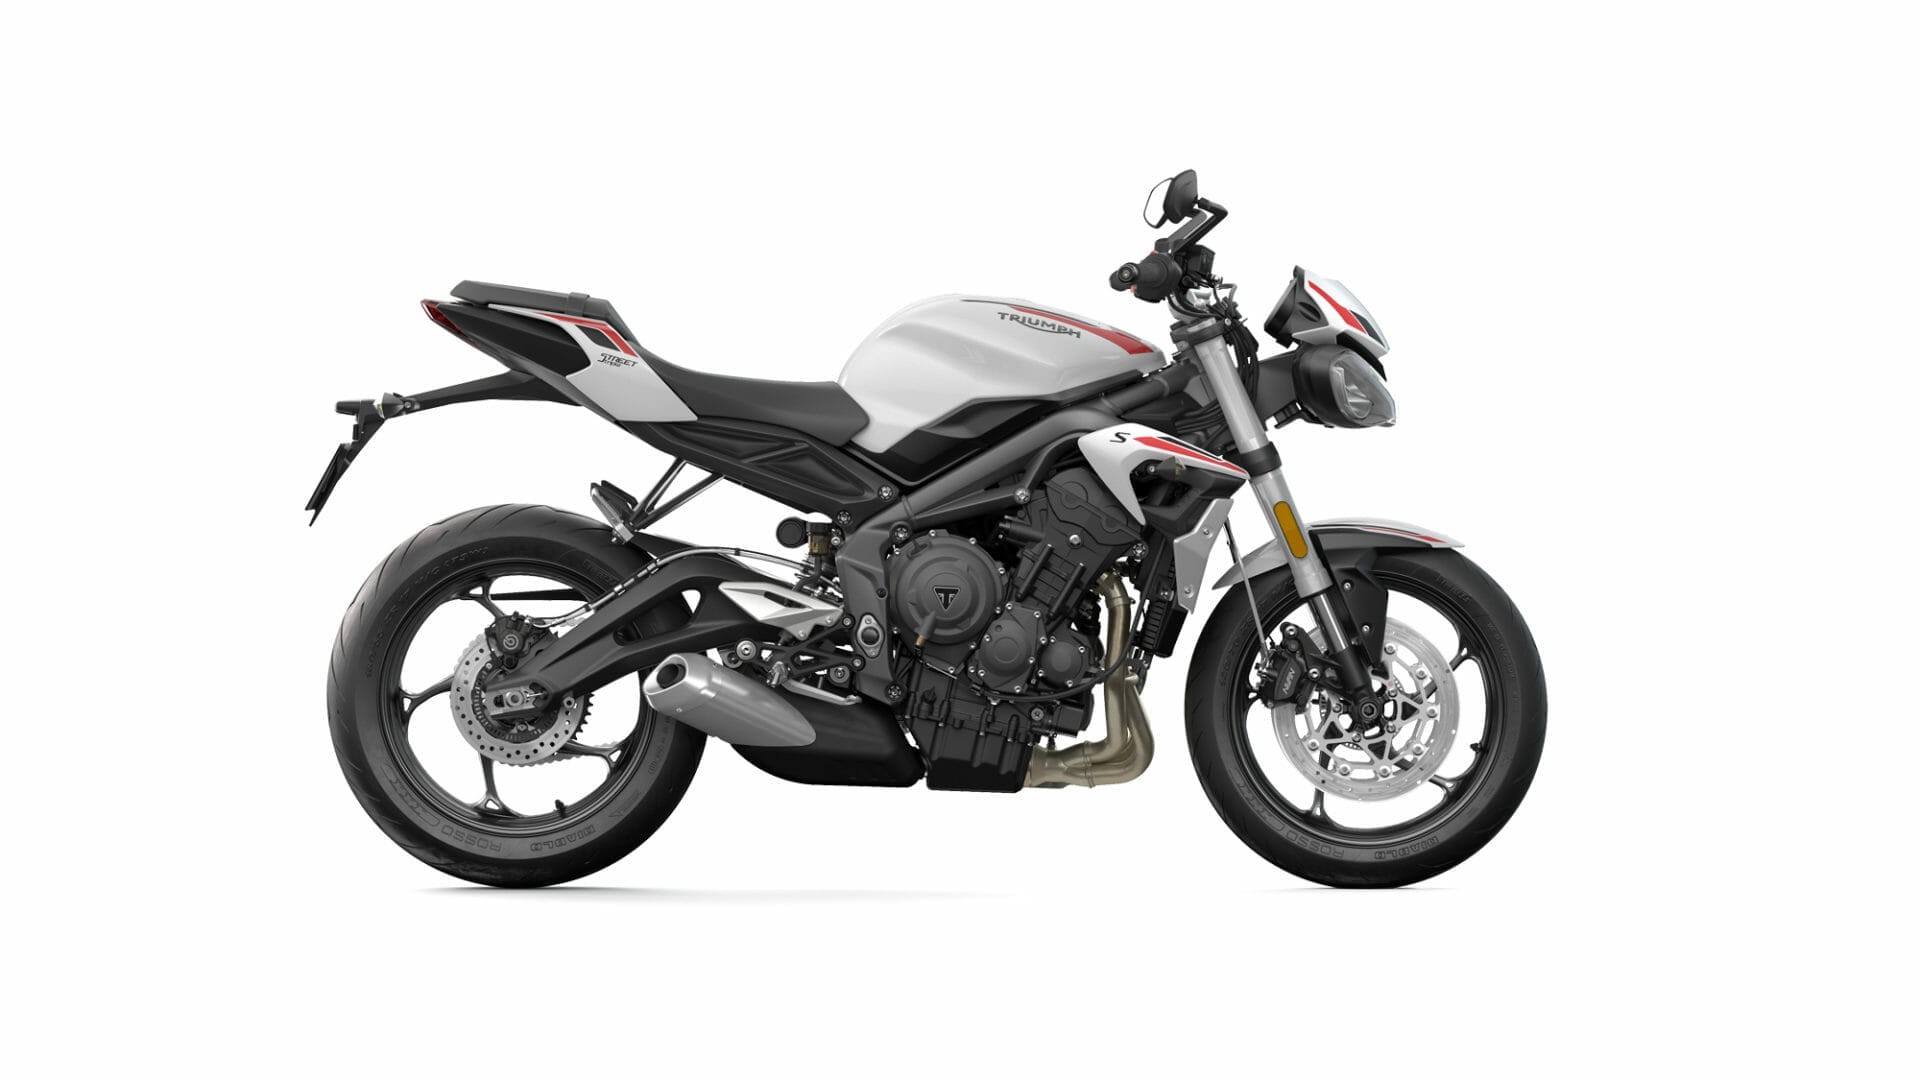 #Triumph Street Triple S on the market from February
- also in the app Motorcycle News